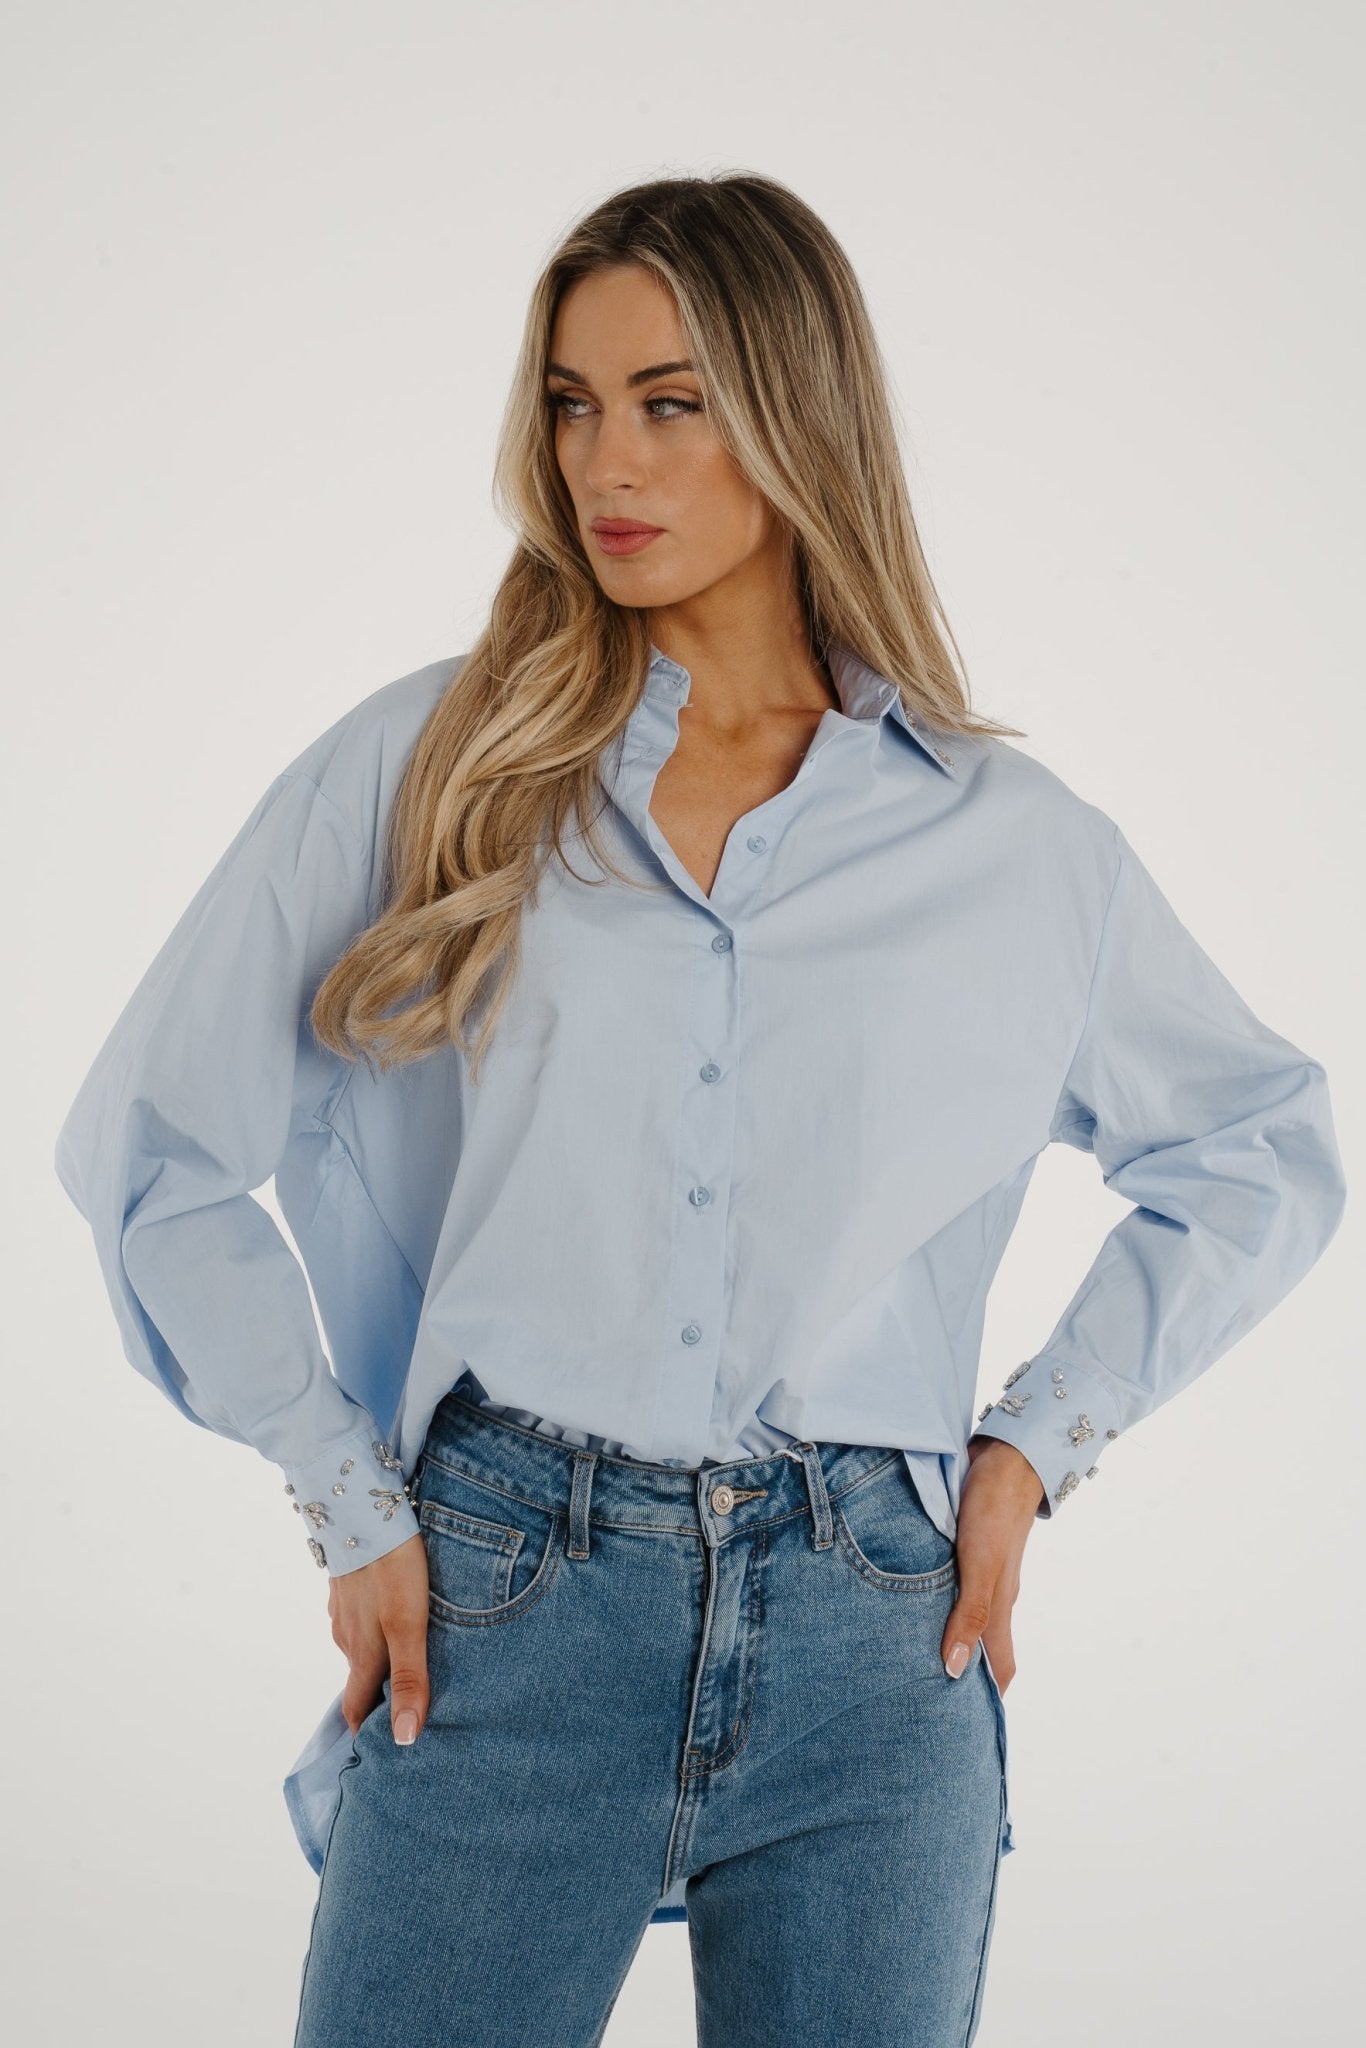 Holly Embellished Shirt In Blue - The Walk in Wardrobe